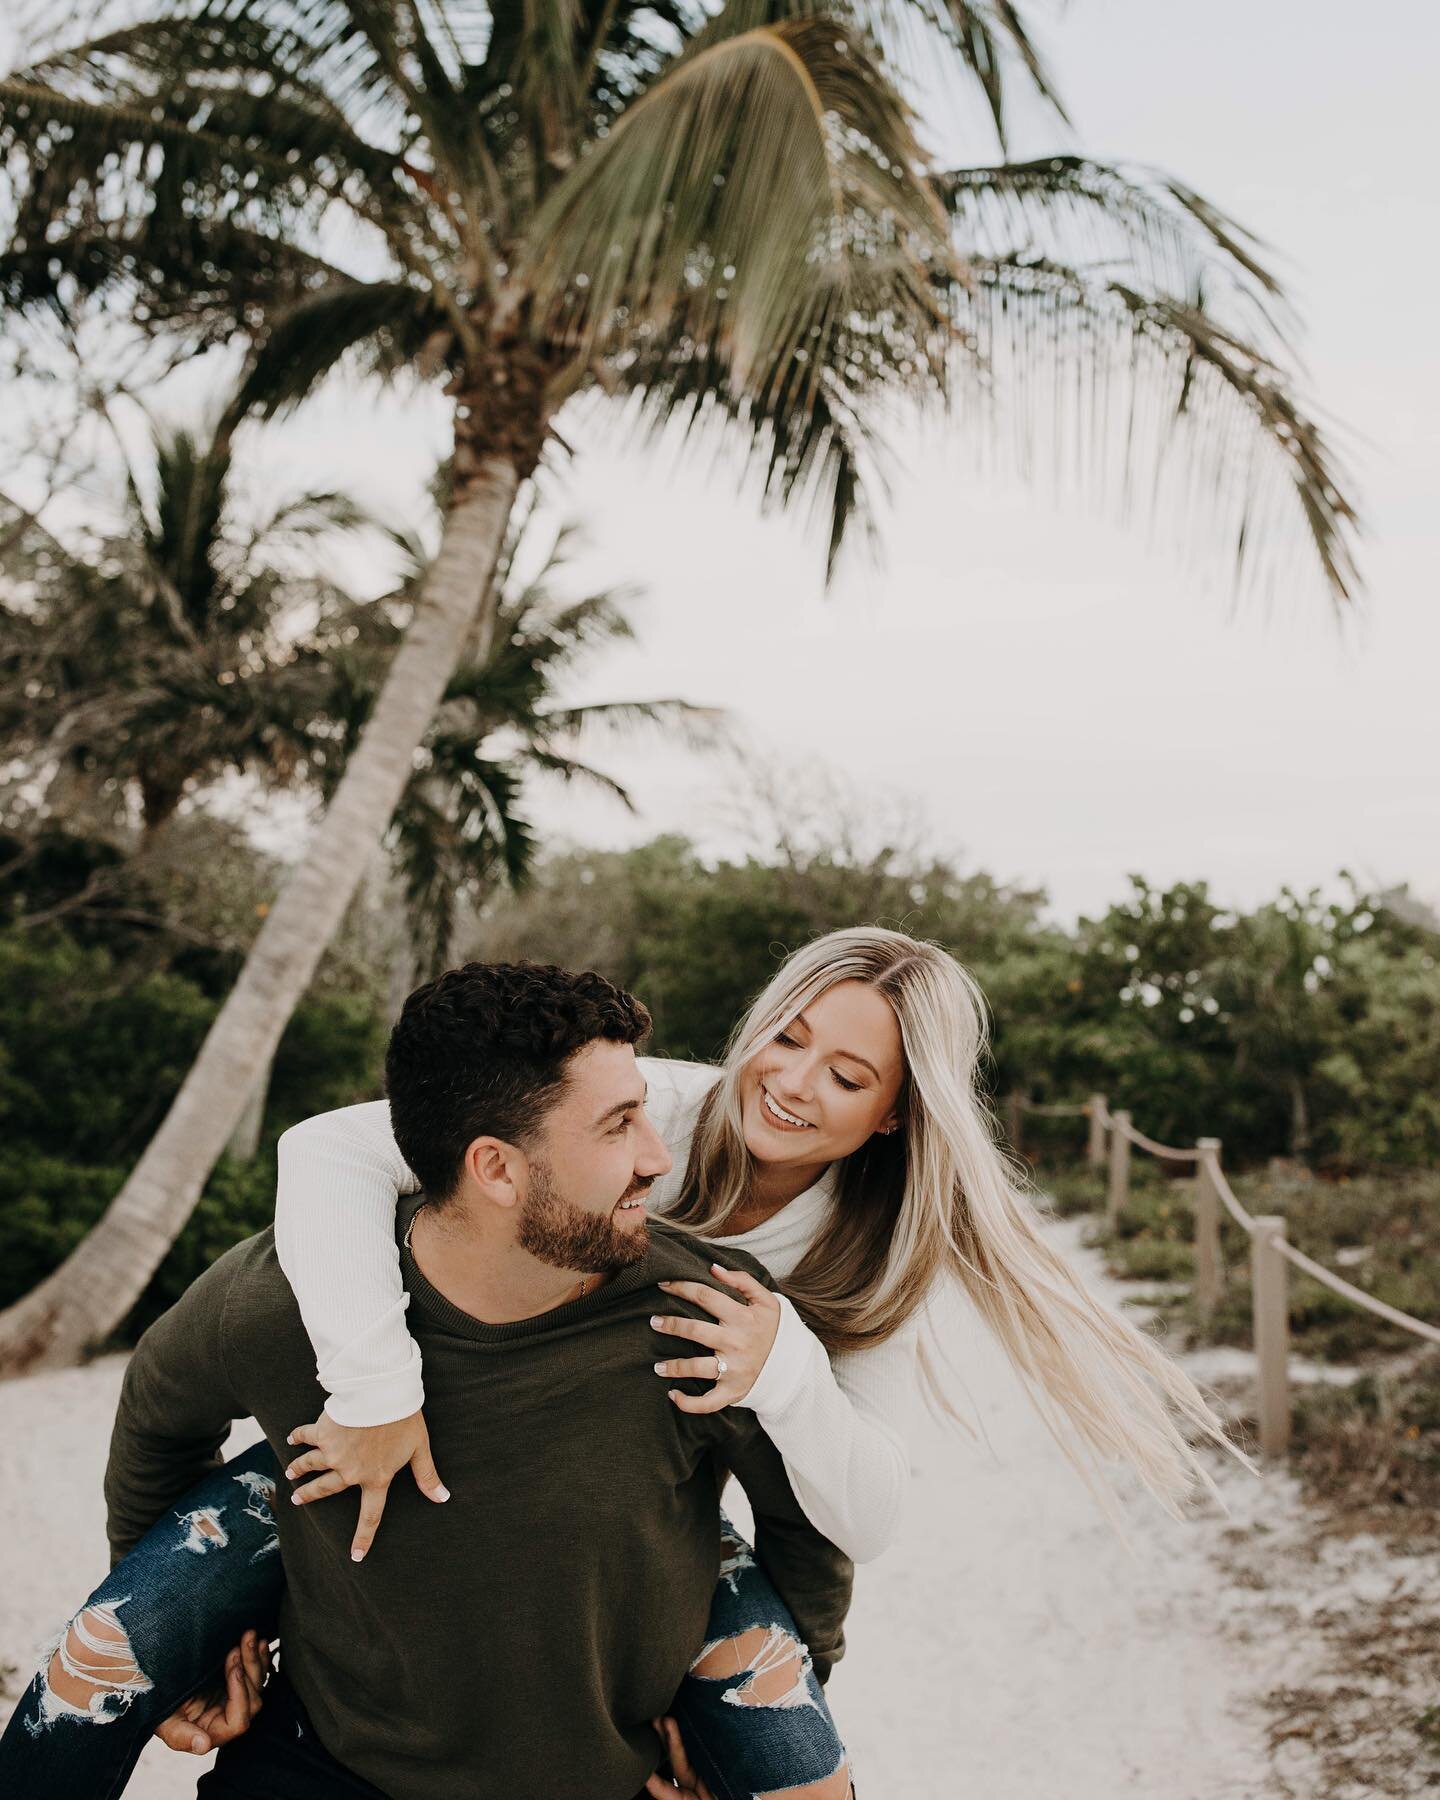 Instagram is always cutting off the tops of my palm trees 🌴😒 But that&rsquo;s a small price to pay for Kaelyn + BJ&rsquo;s adorableness &mdash; so we&rsquo;ll let it slide this time... 😜